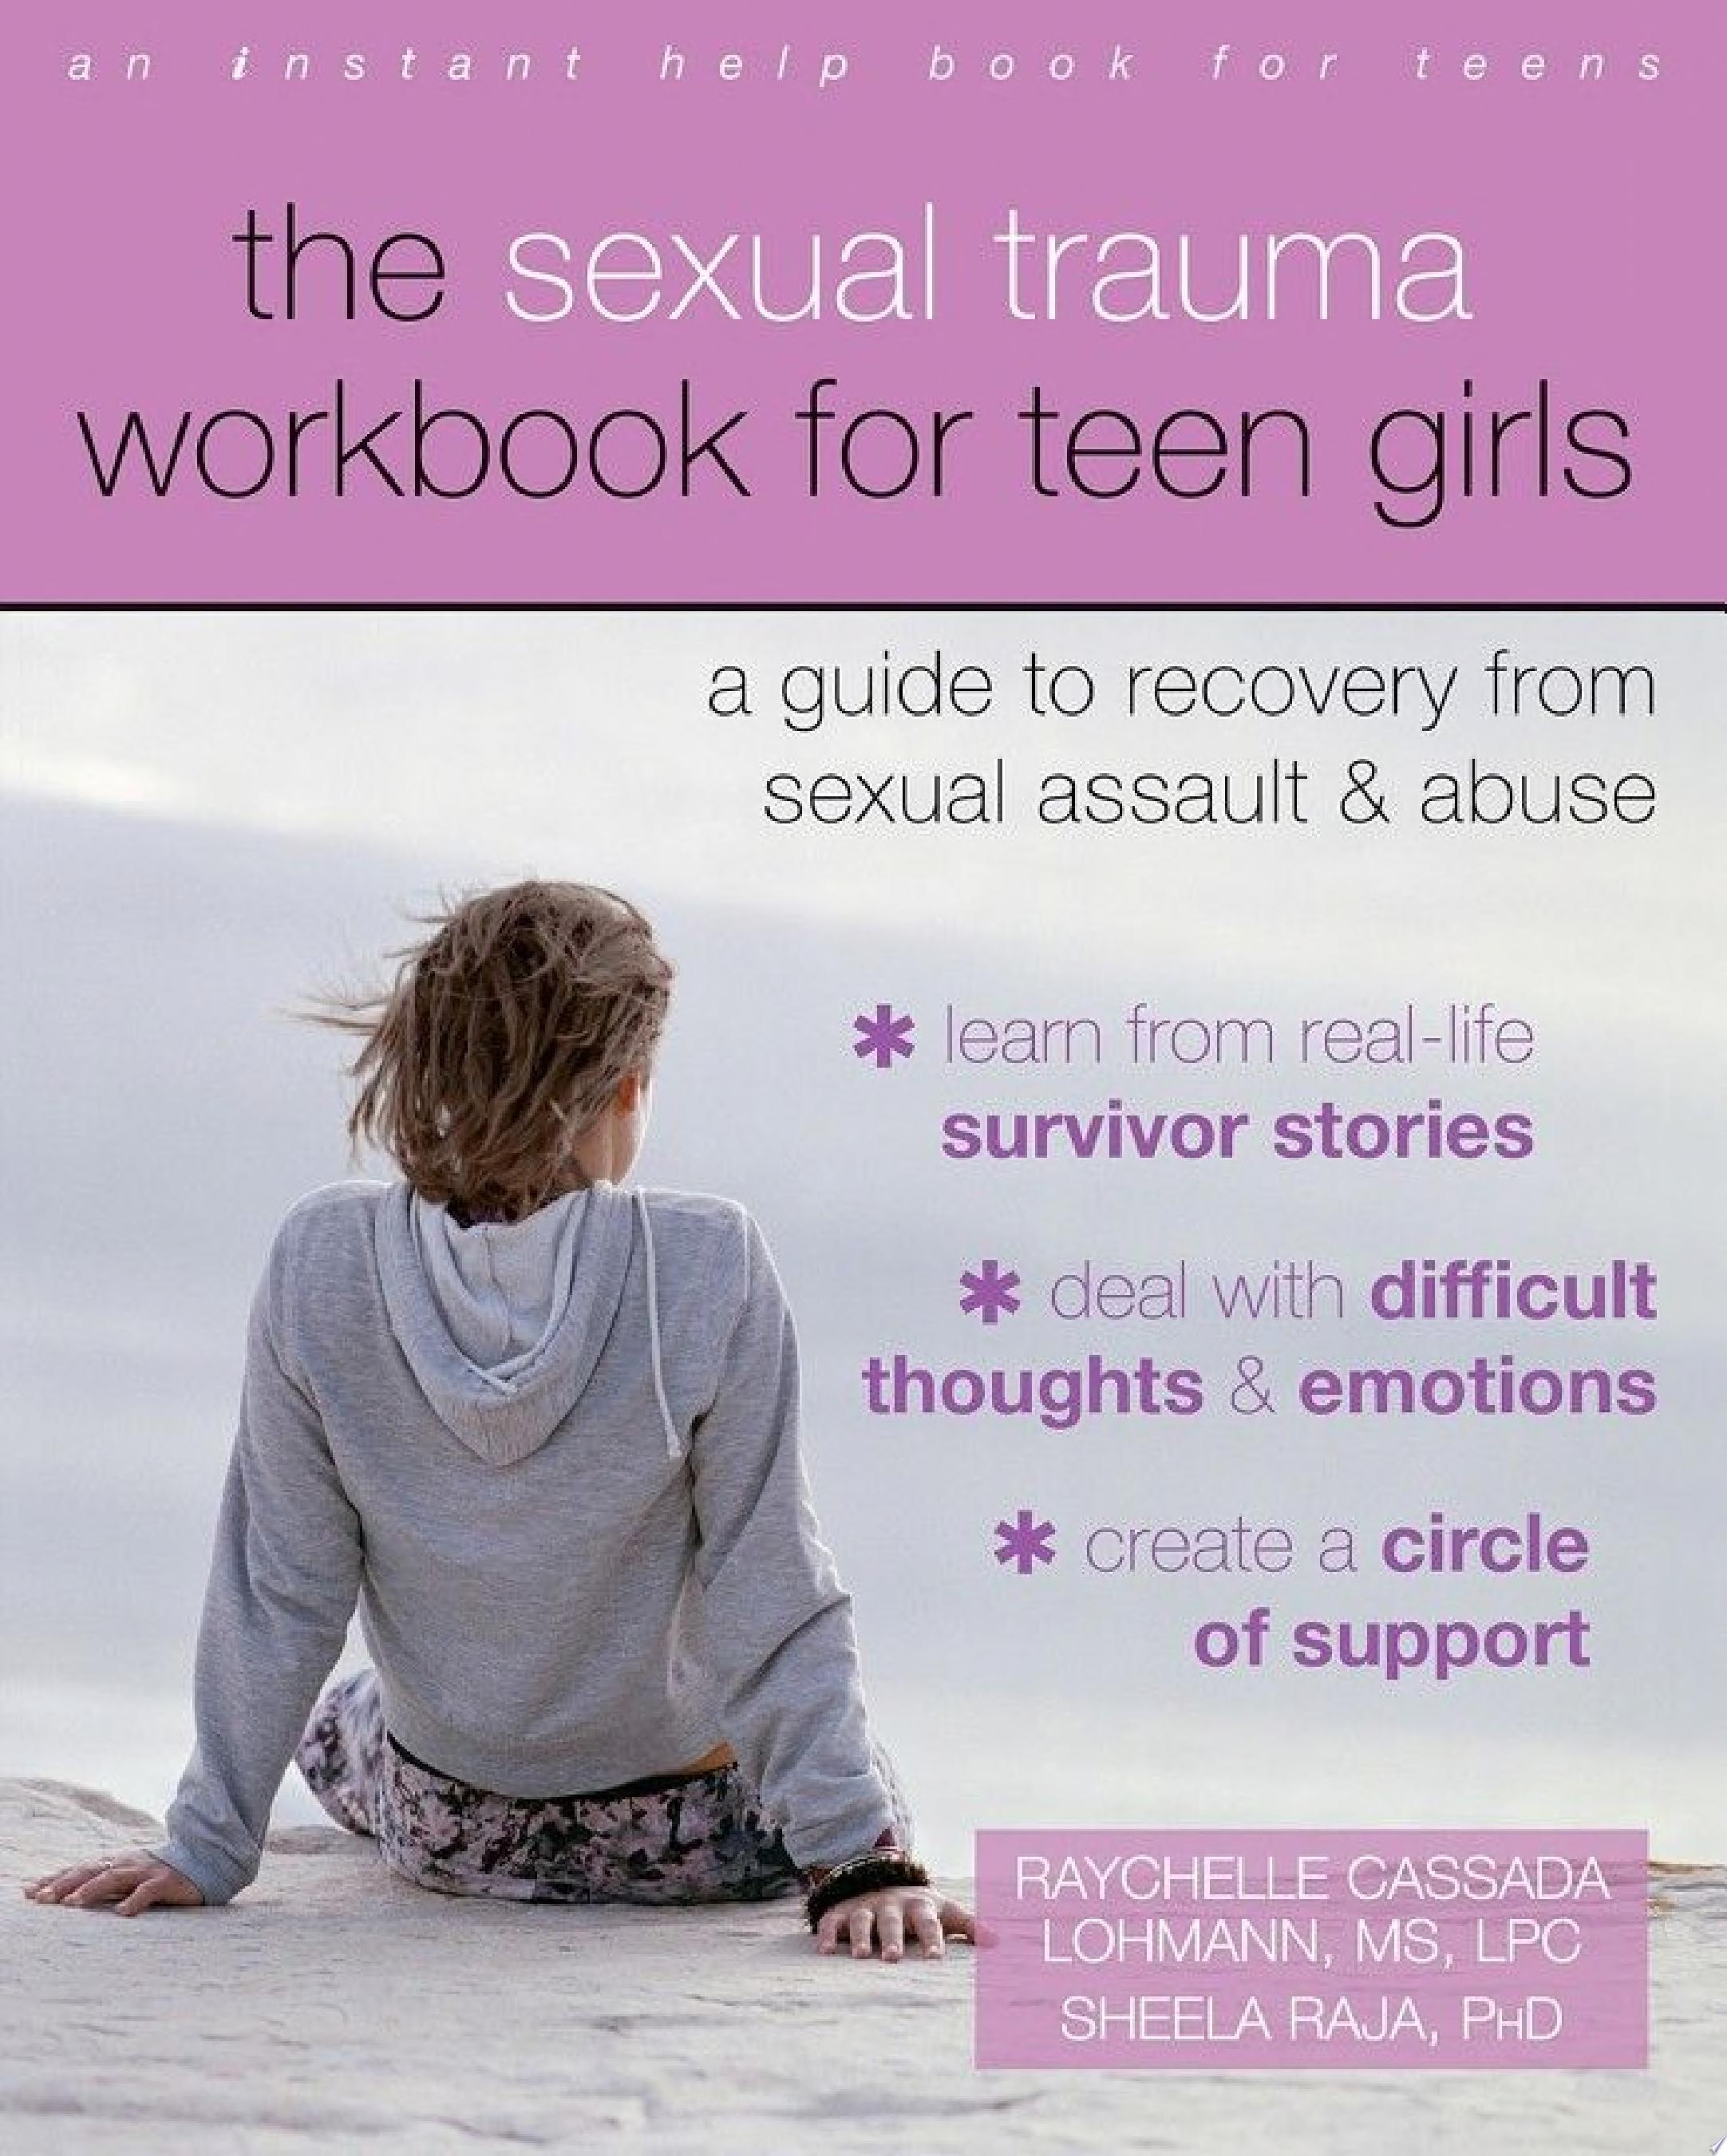 Image for "The Sexual Trauma Workbook for Teen Girls"